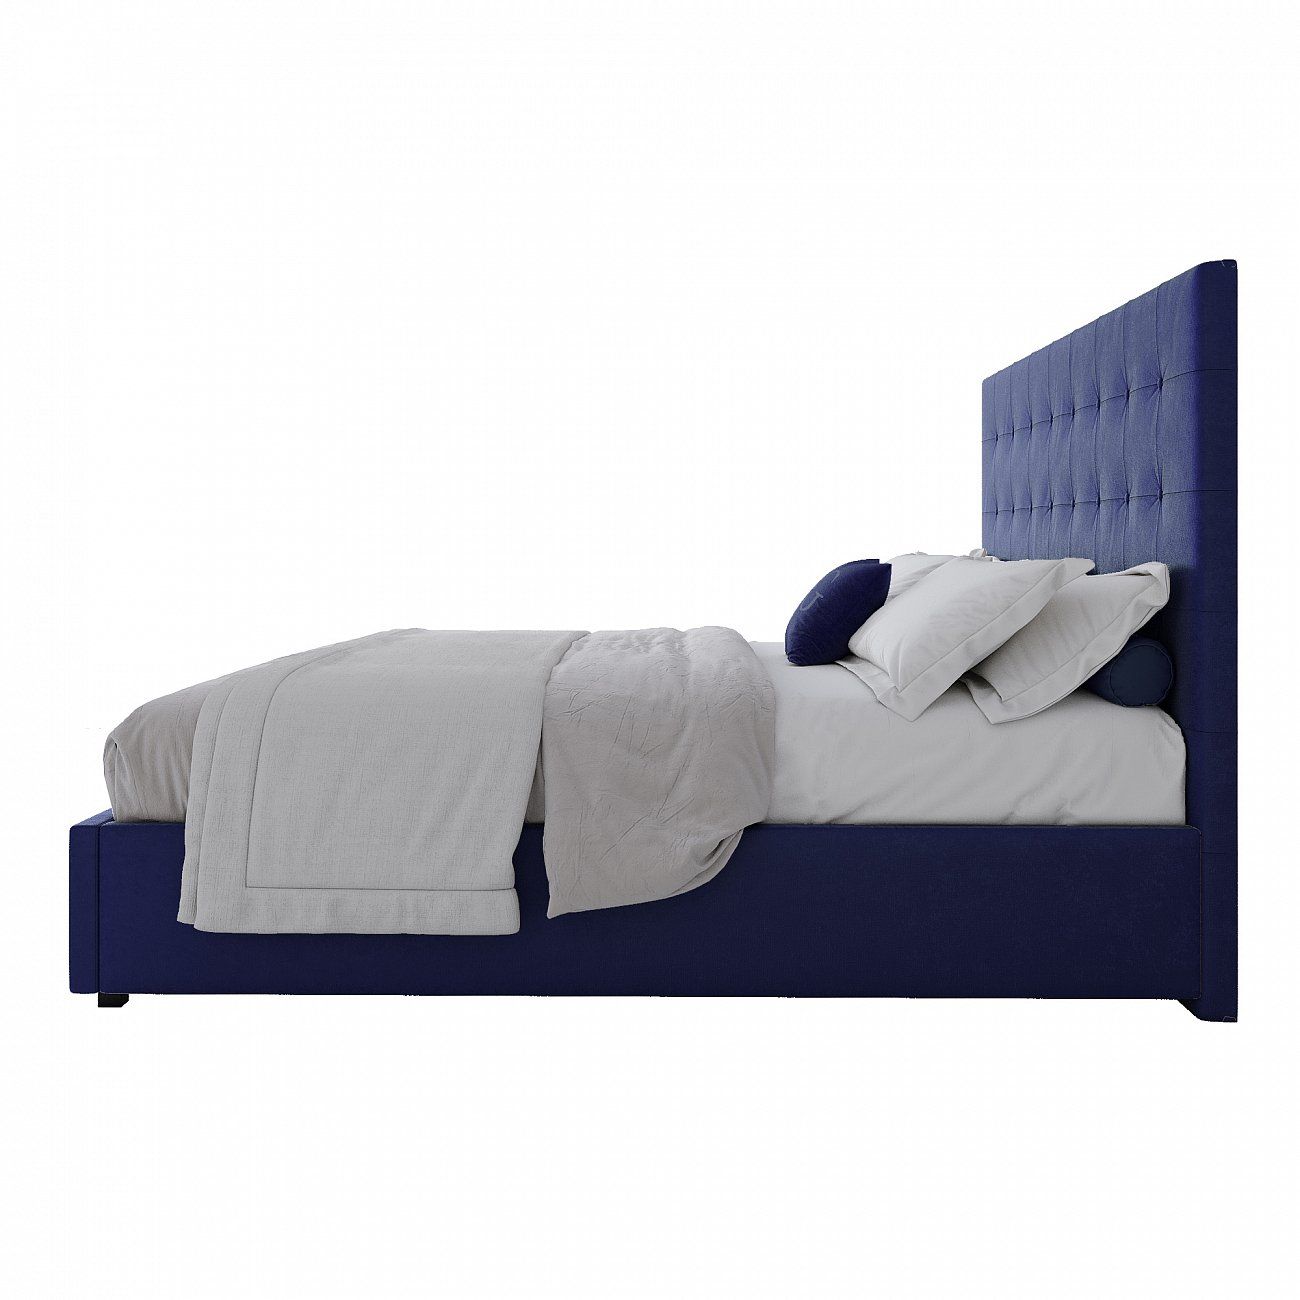 Double bed with upholstered headboard 180x200 cm blue Royal Black